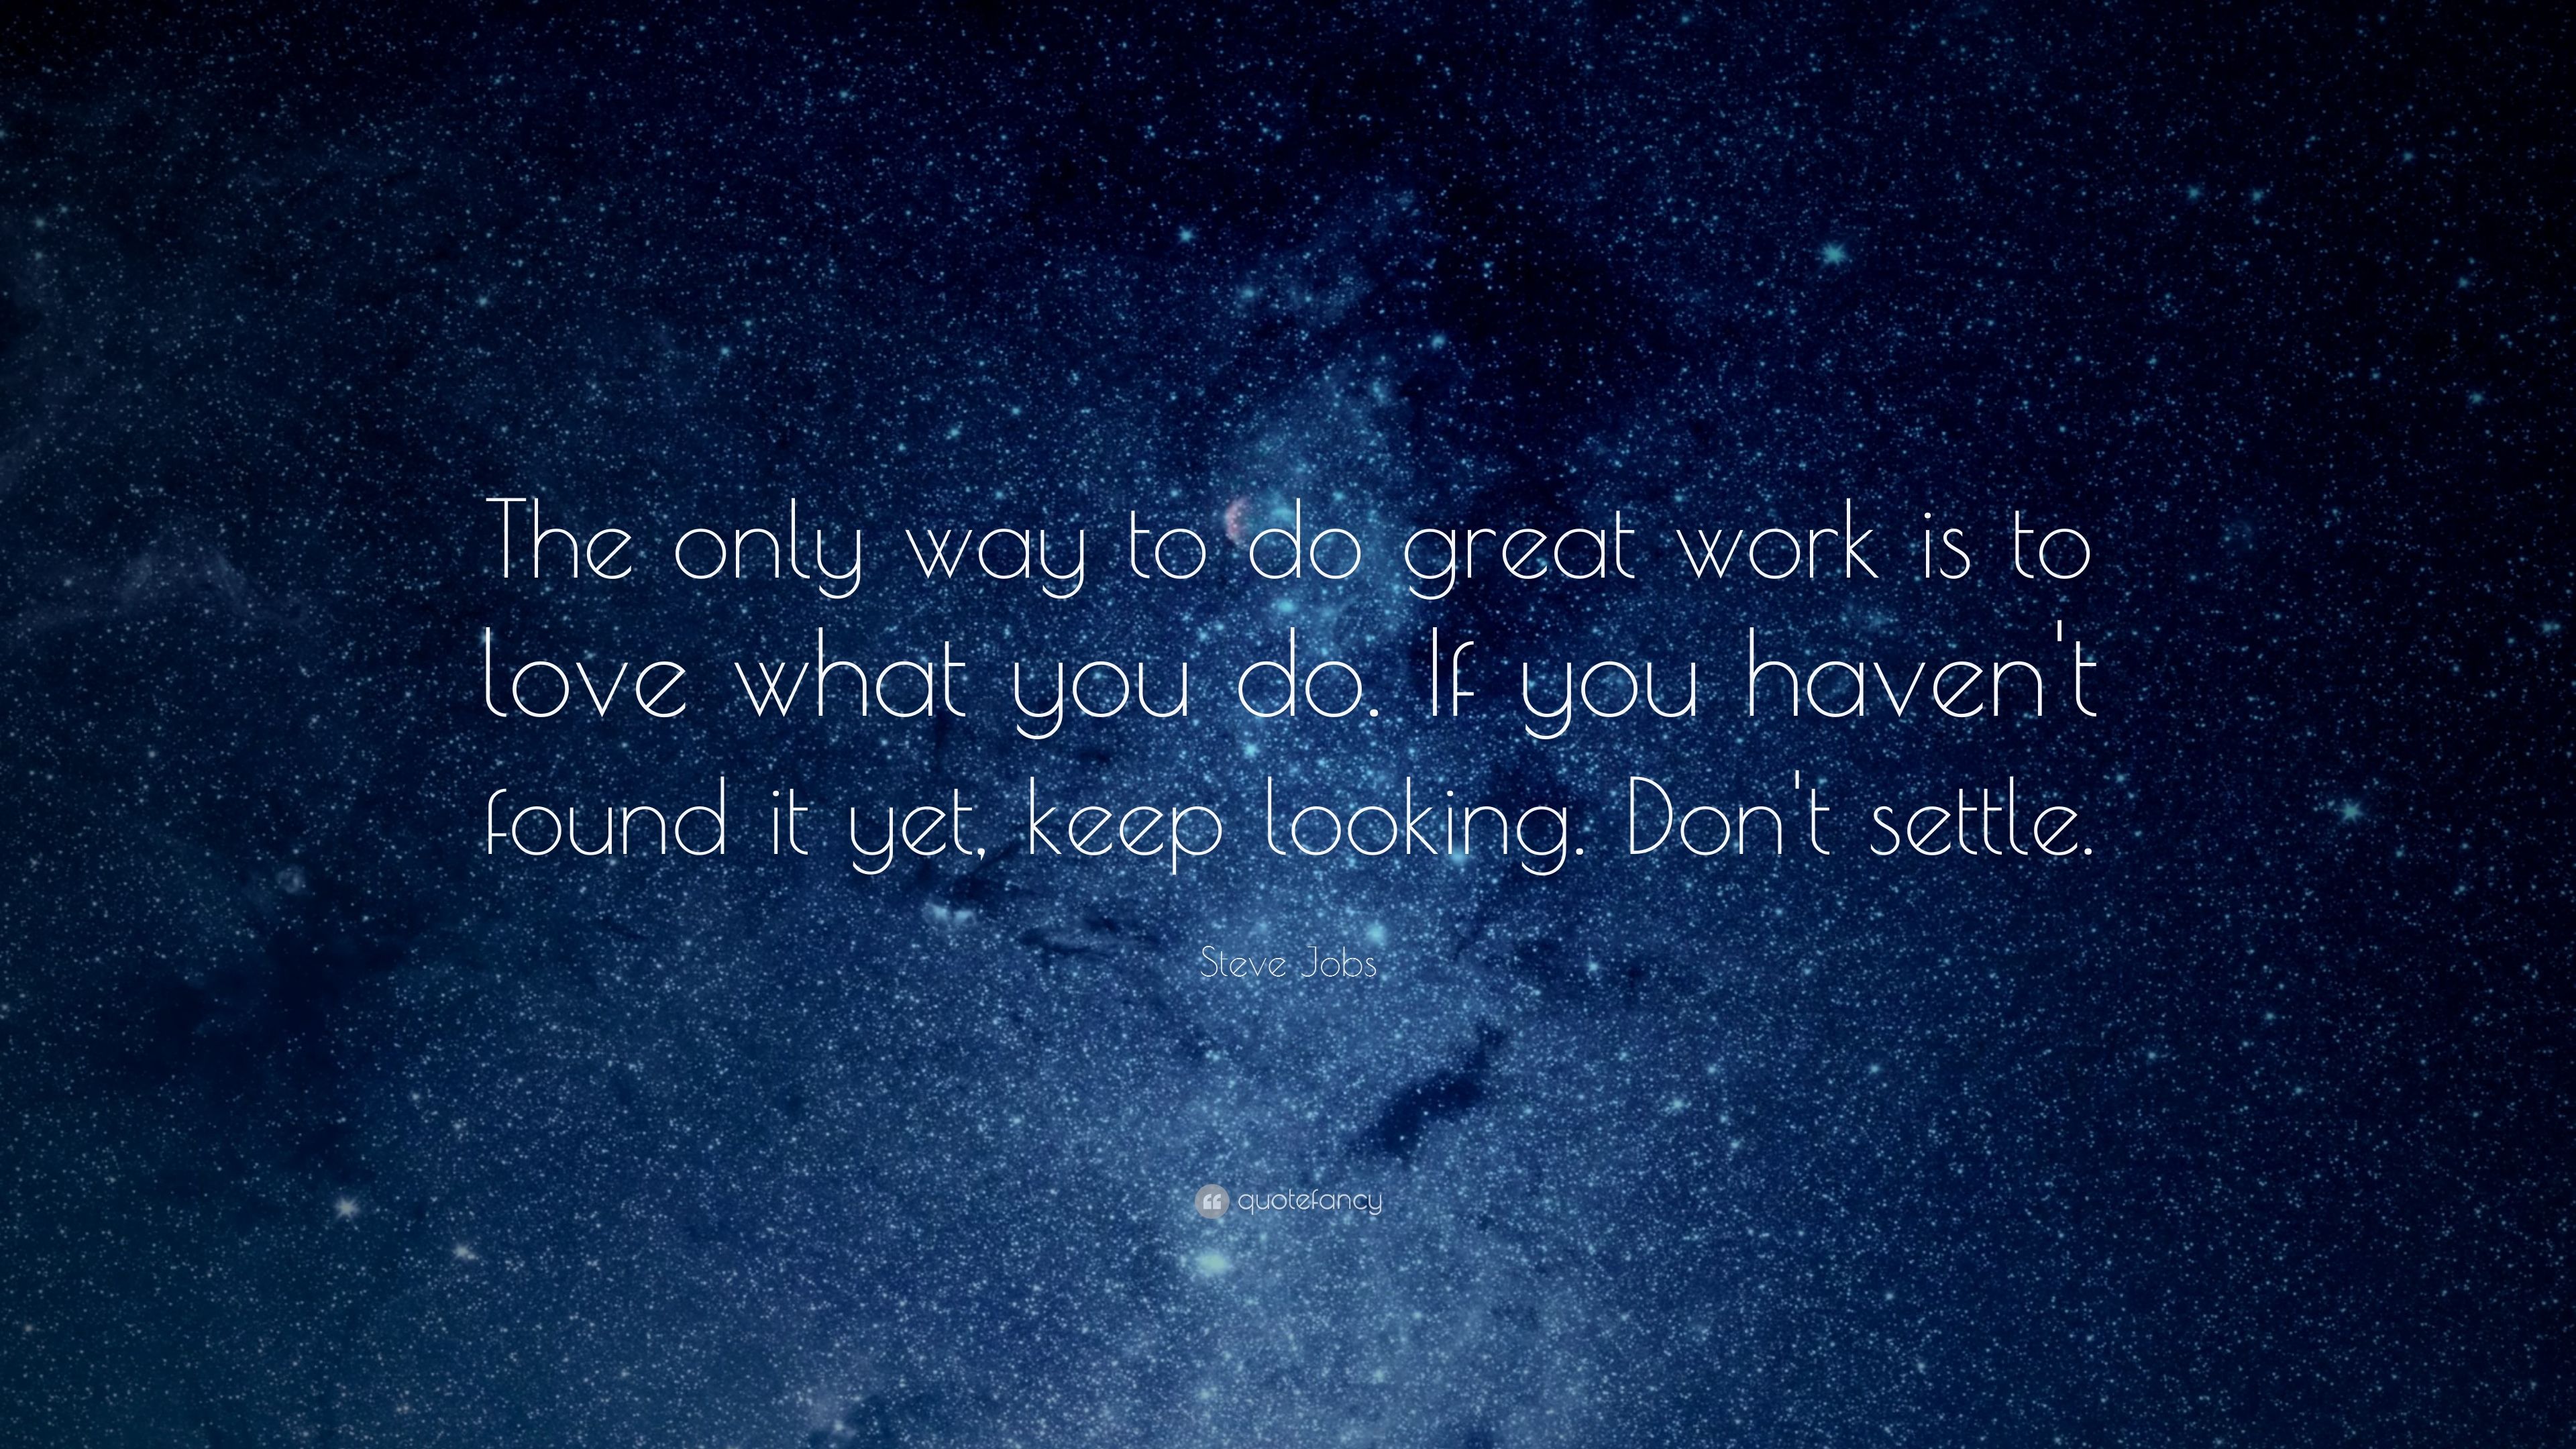 Steve Jobs Quote: “The only way to do great work is to love what you